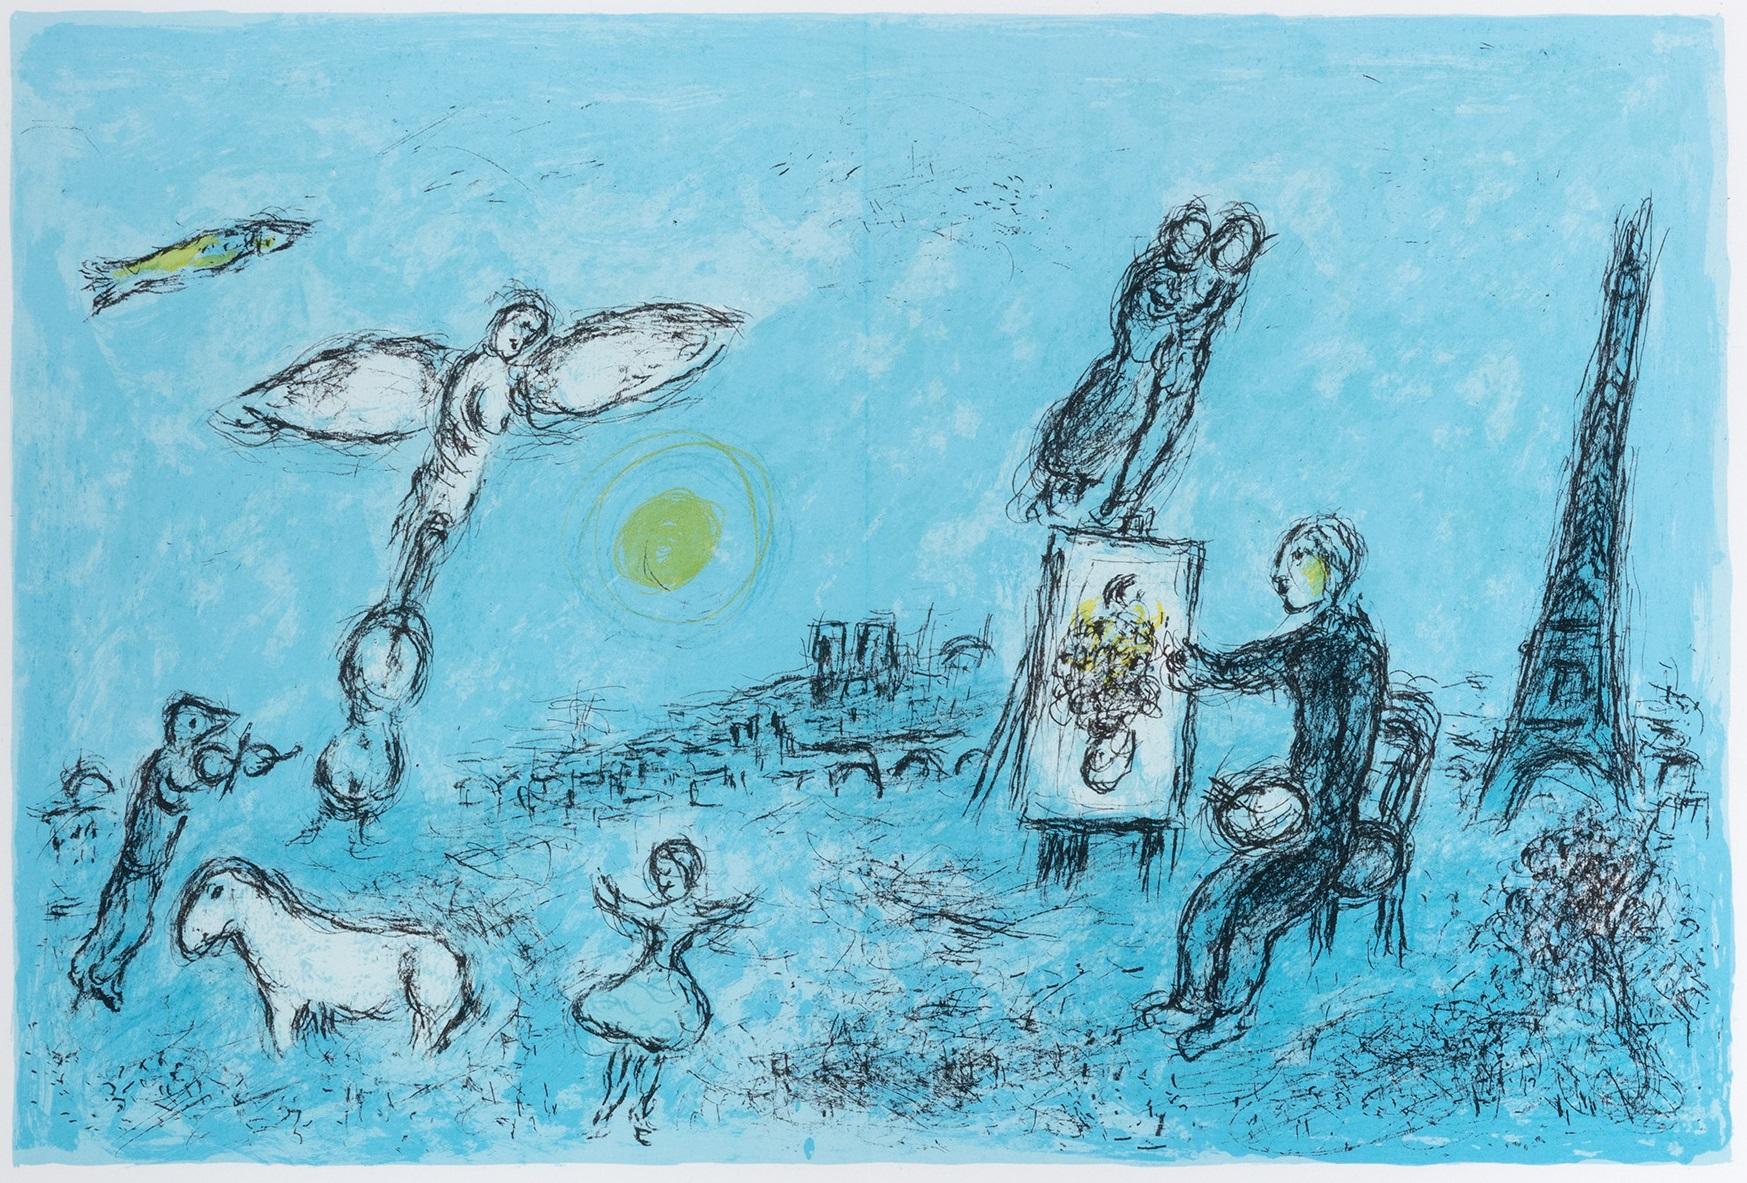 Le Peintre et son Double (The Painter and his Double) - Print by Marc Chagall